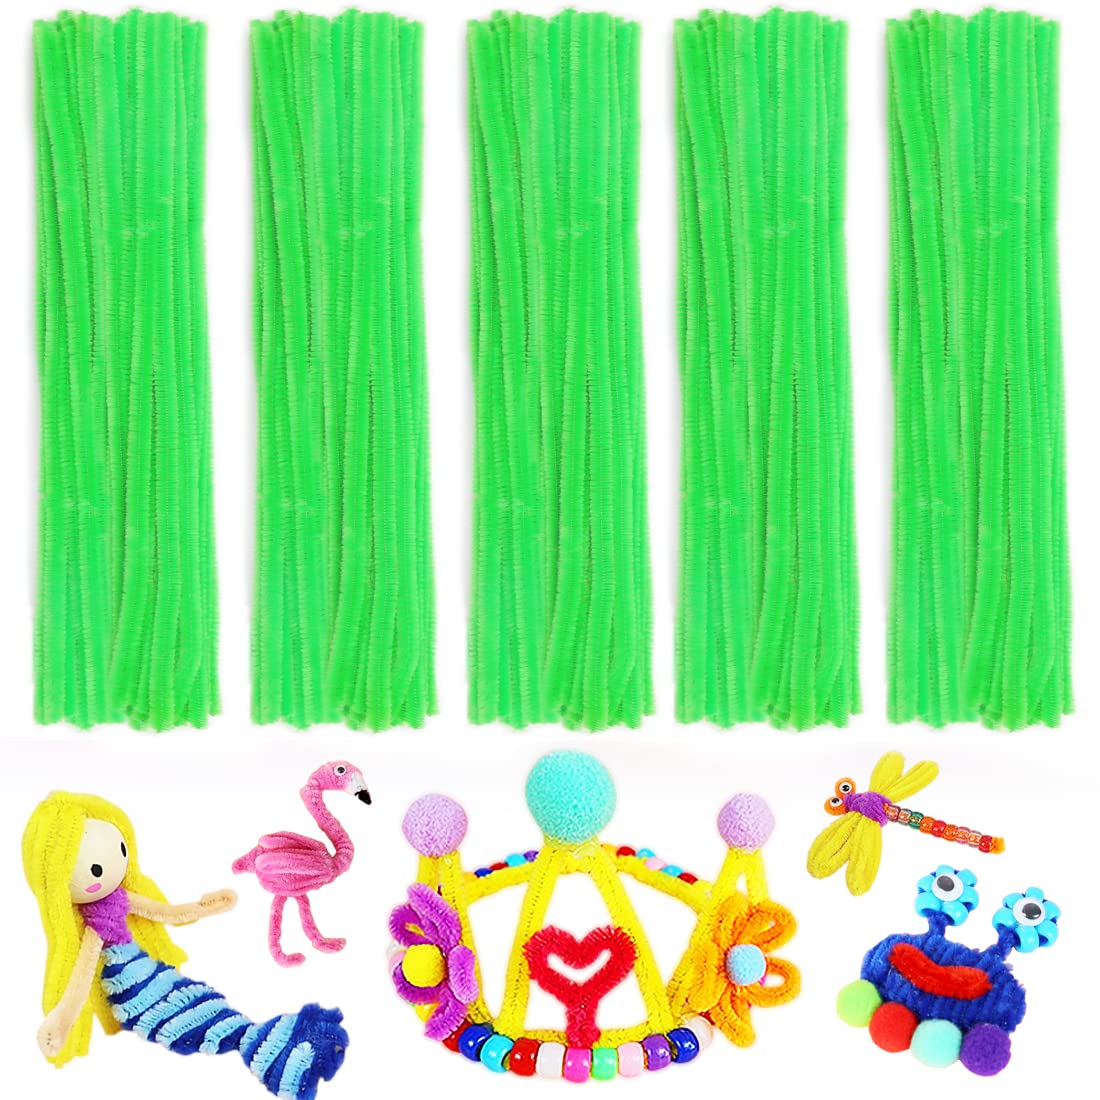 Bundooraking Pipe Cleaners, Pipe Cleaners Craft, Arts and Crafts